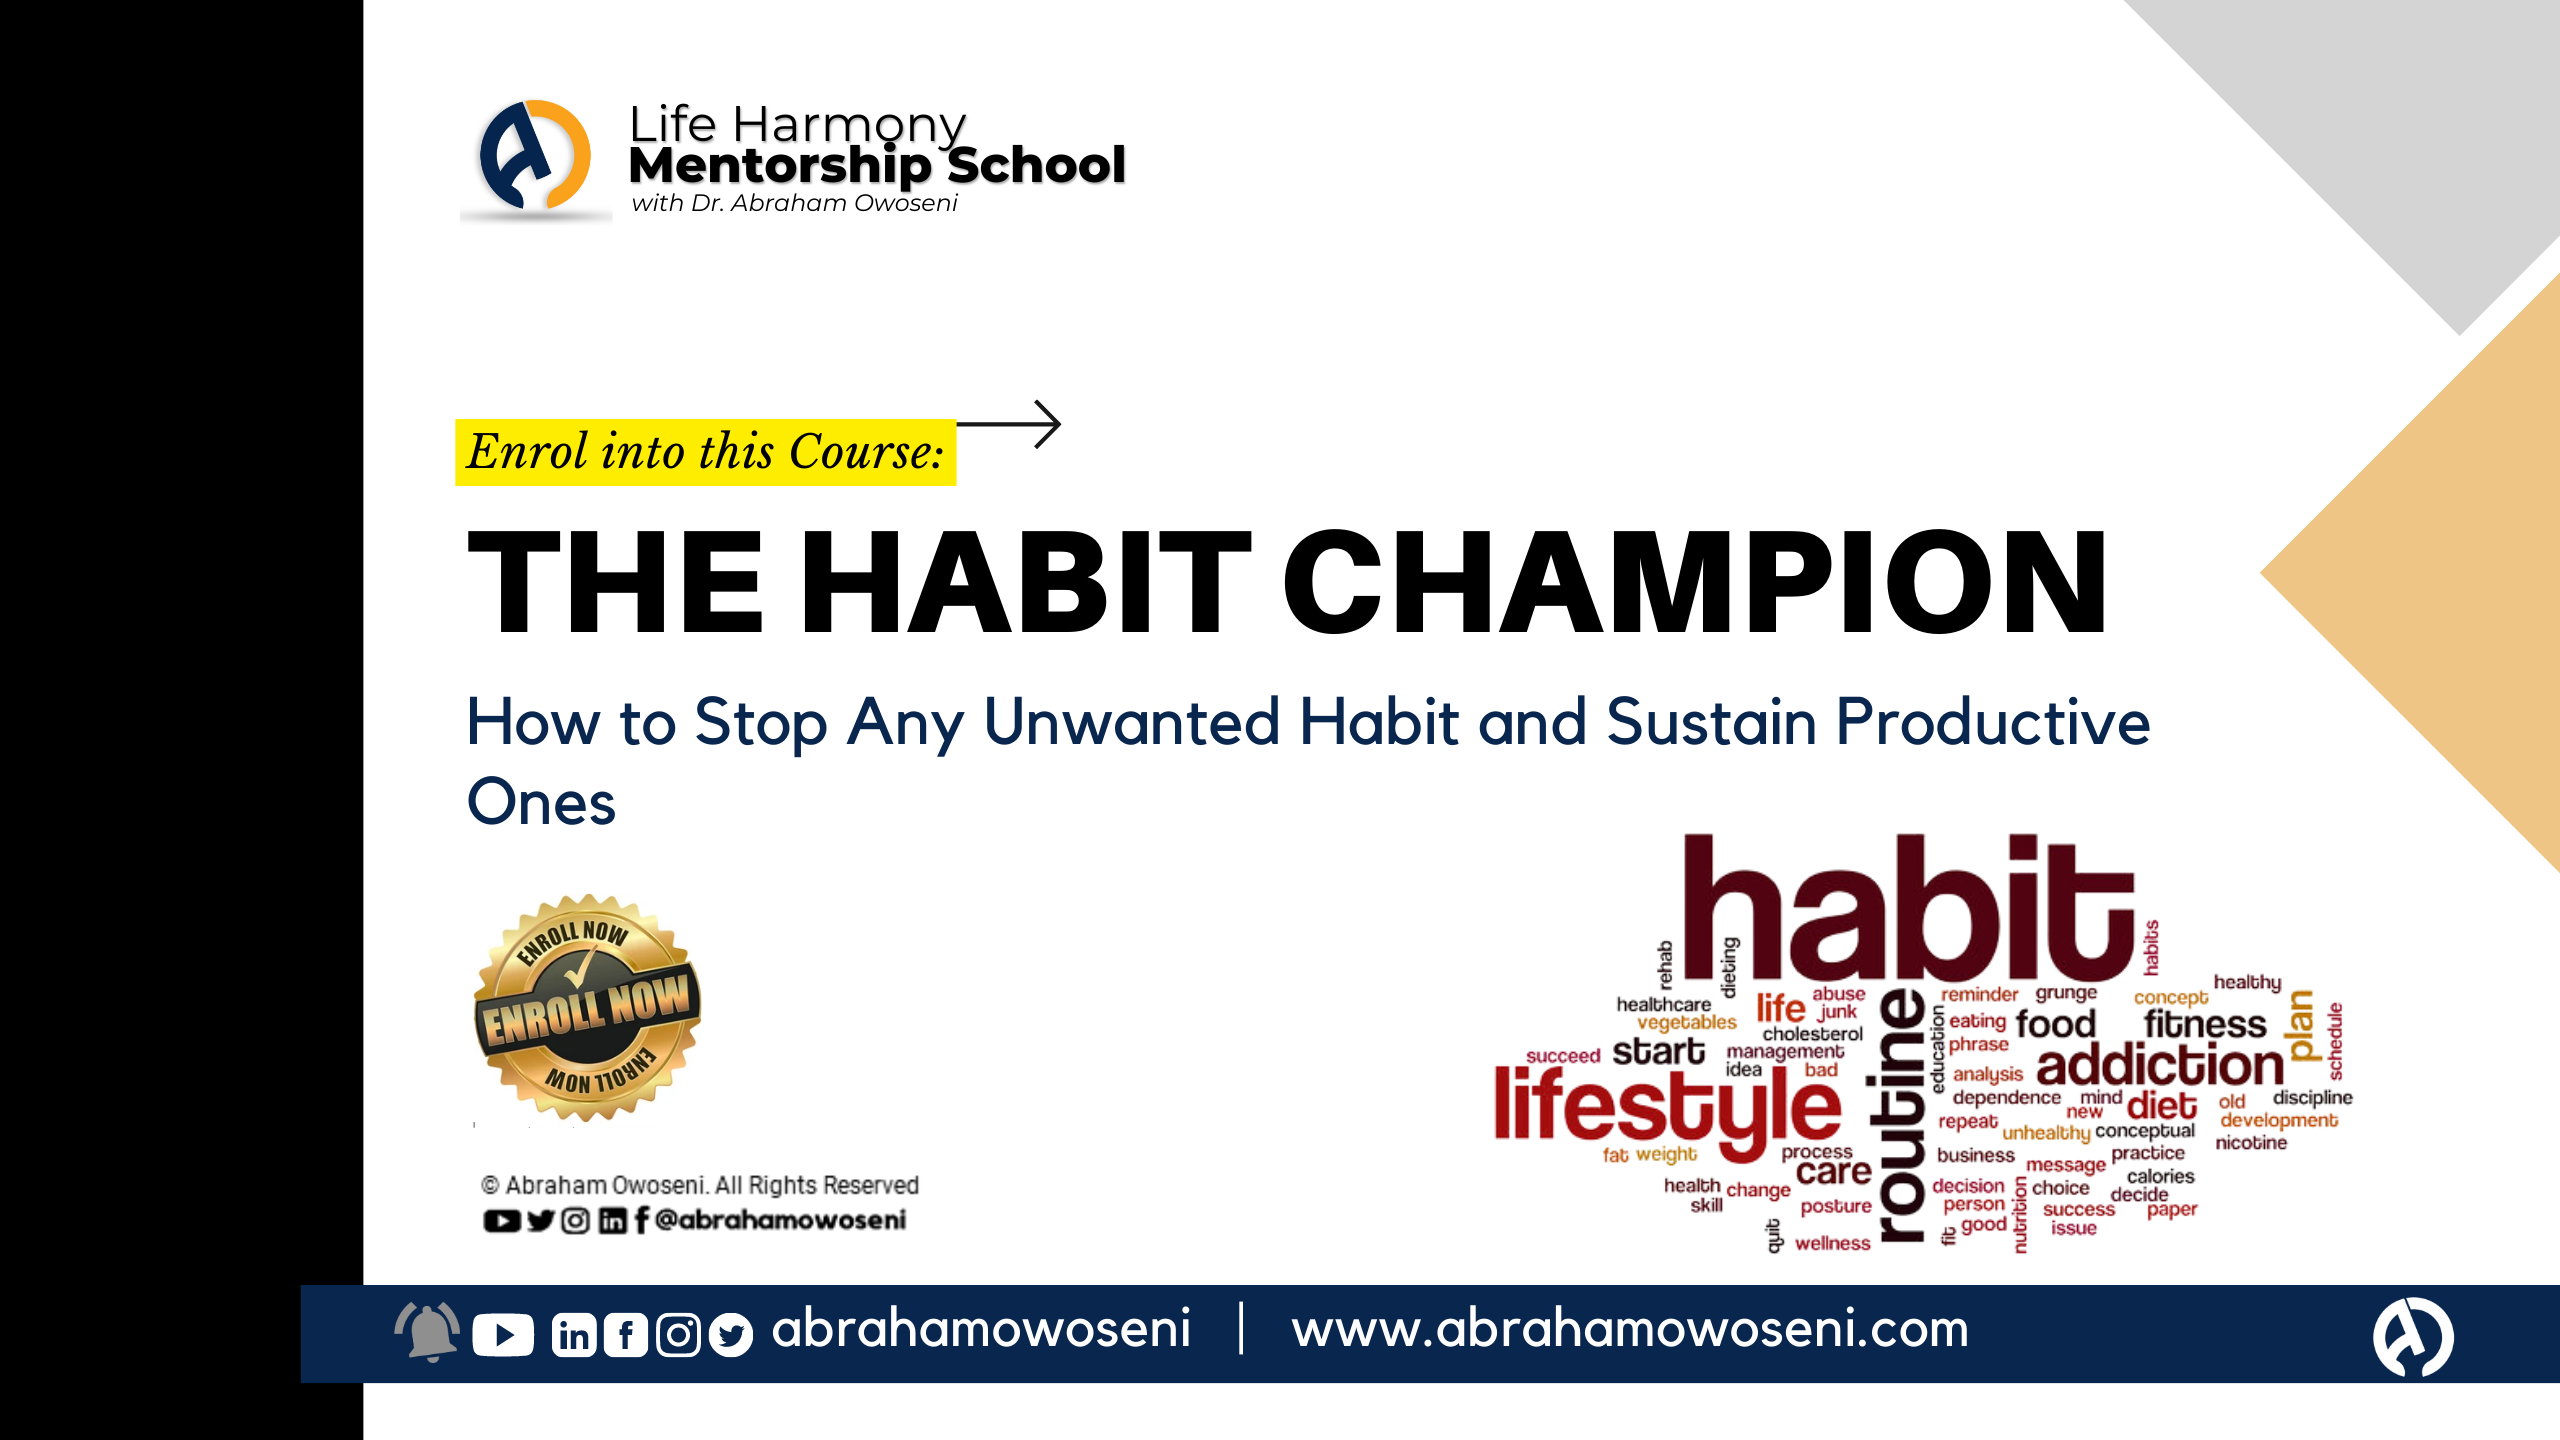 The Habit Champion: How to Stop Any Unwanted Habit and Sustain Productive Ones